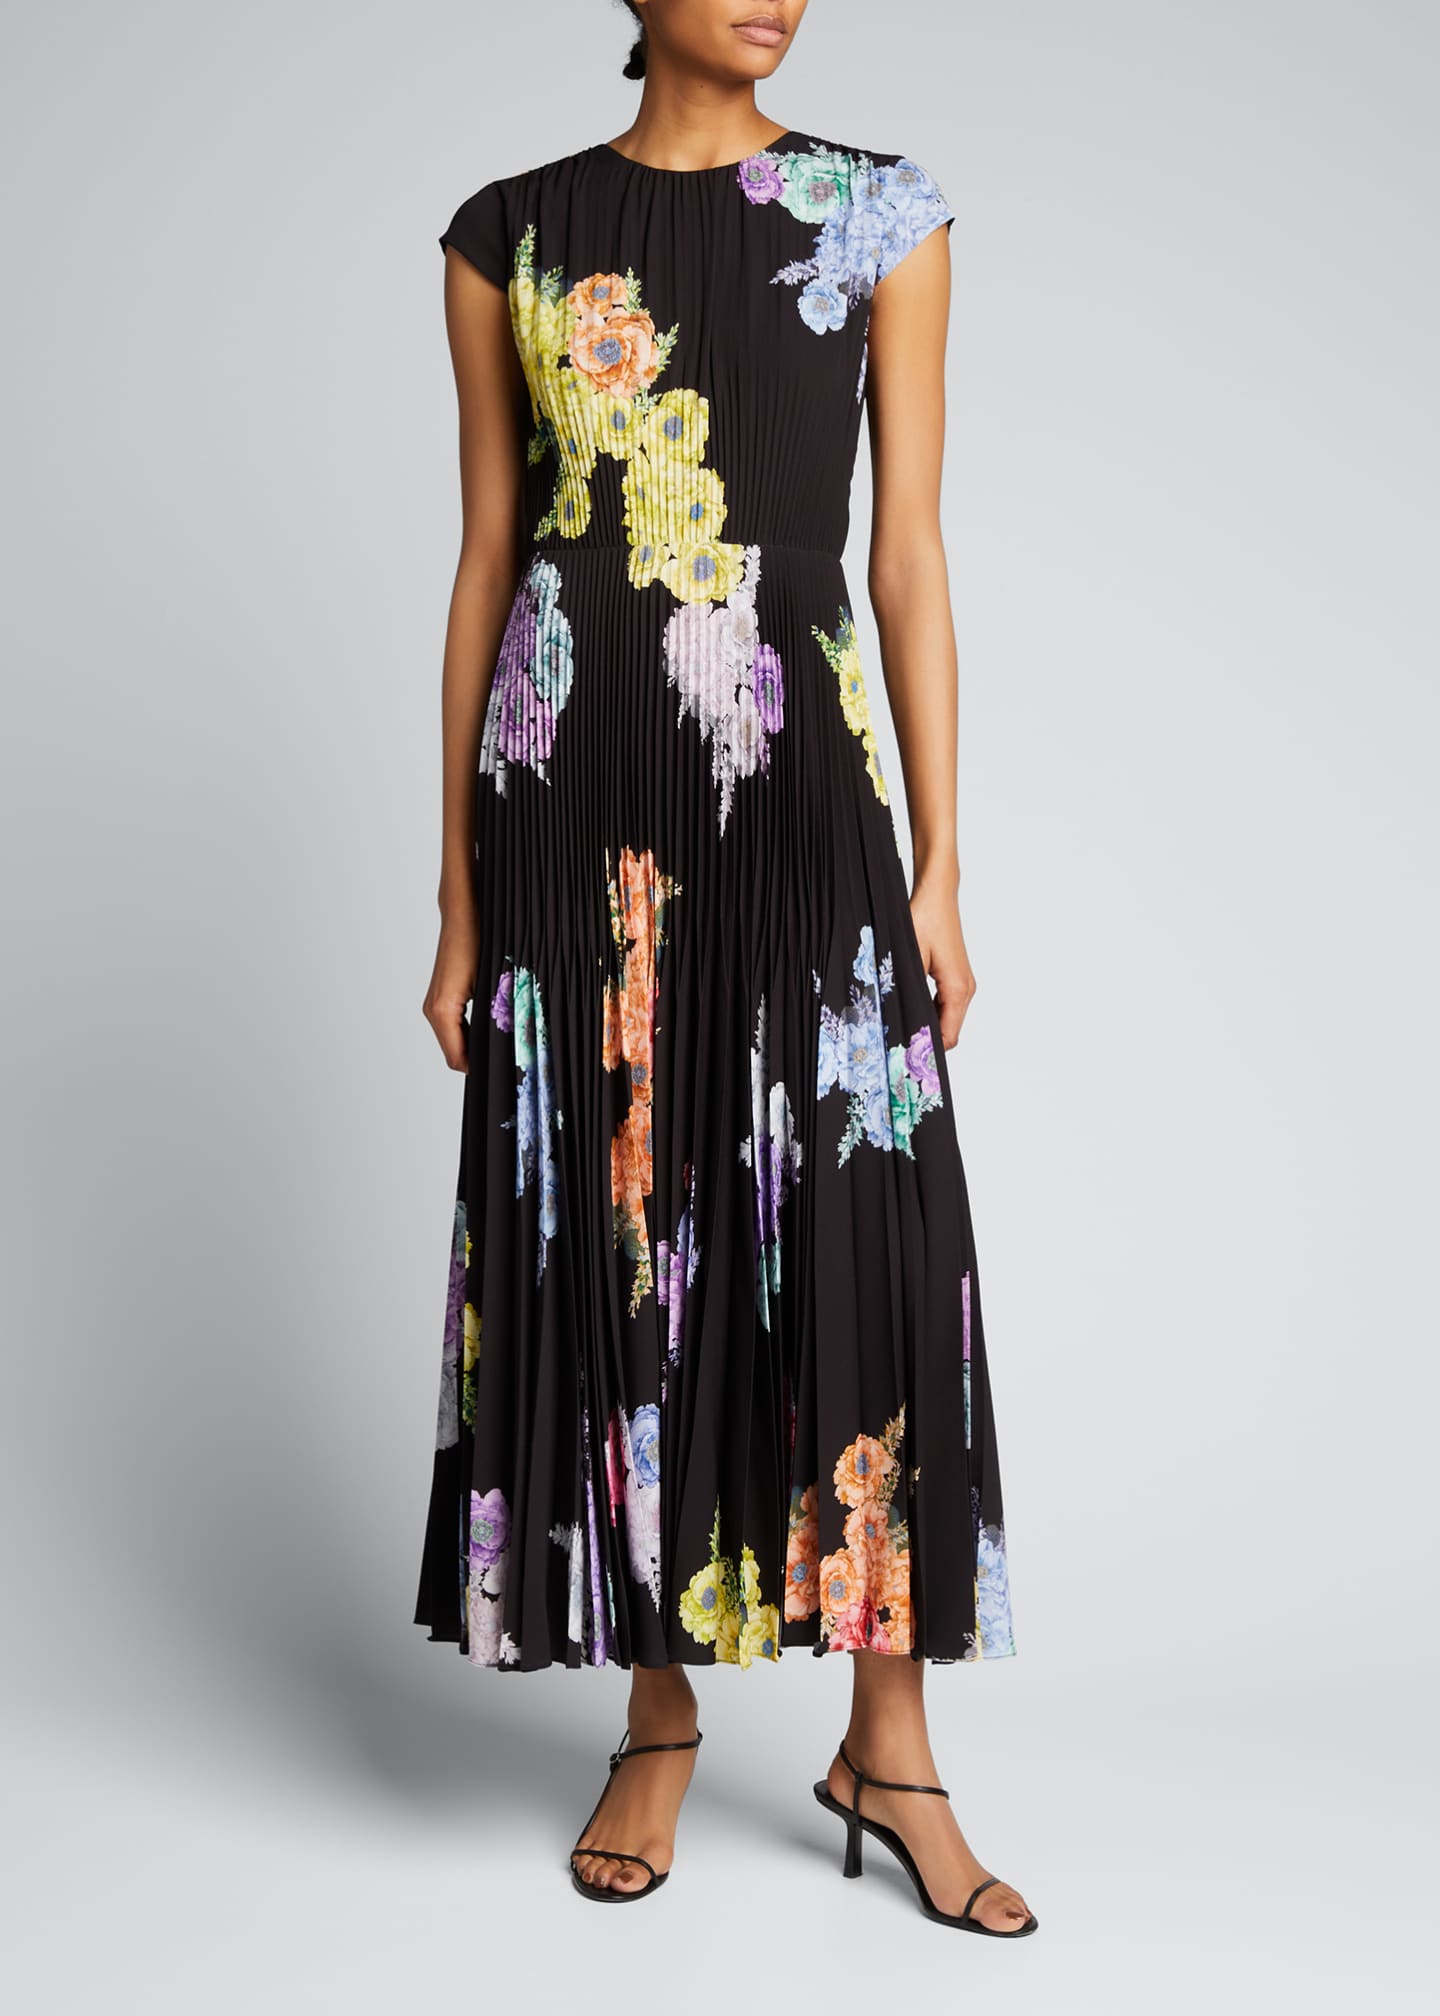 Jason Wu Collection Floral-Print Pleated Day Dress - Bergdorf Goodman